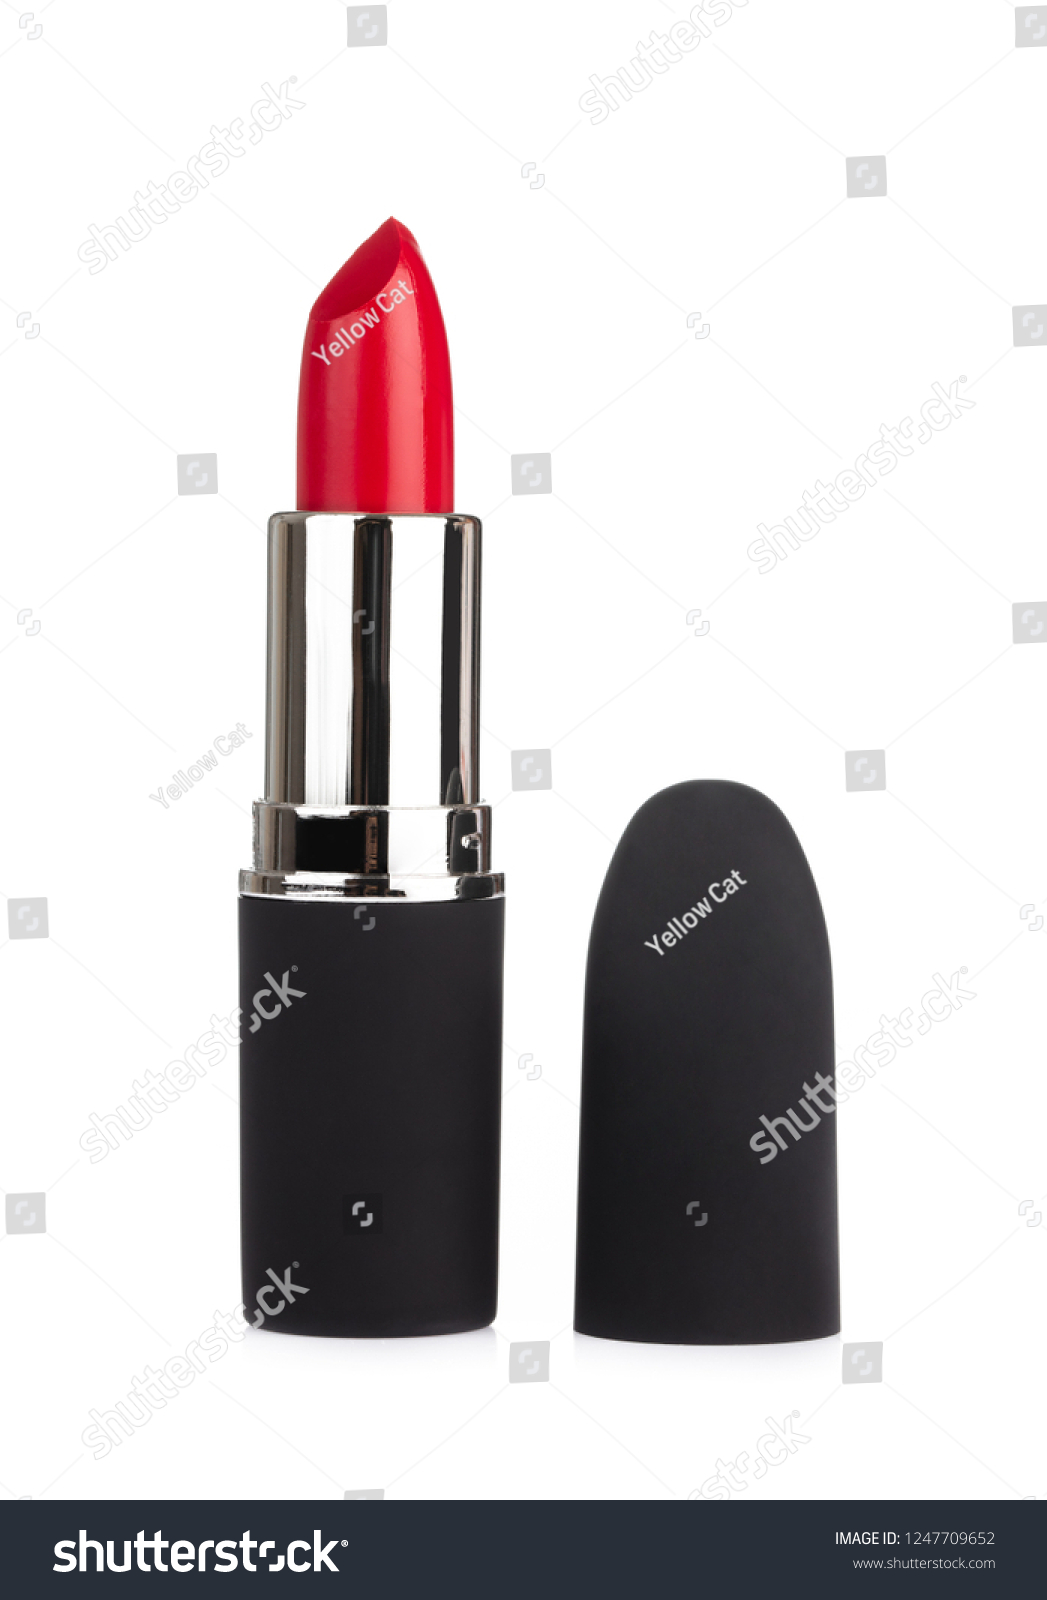 Red lipstick isolated on white background #1247709652